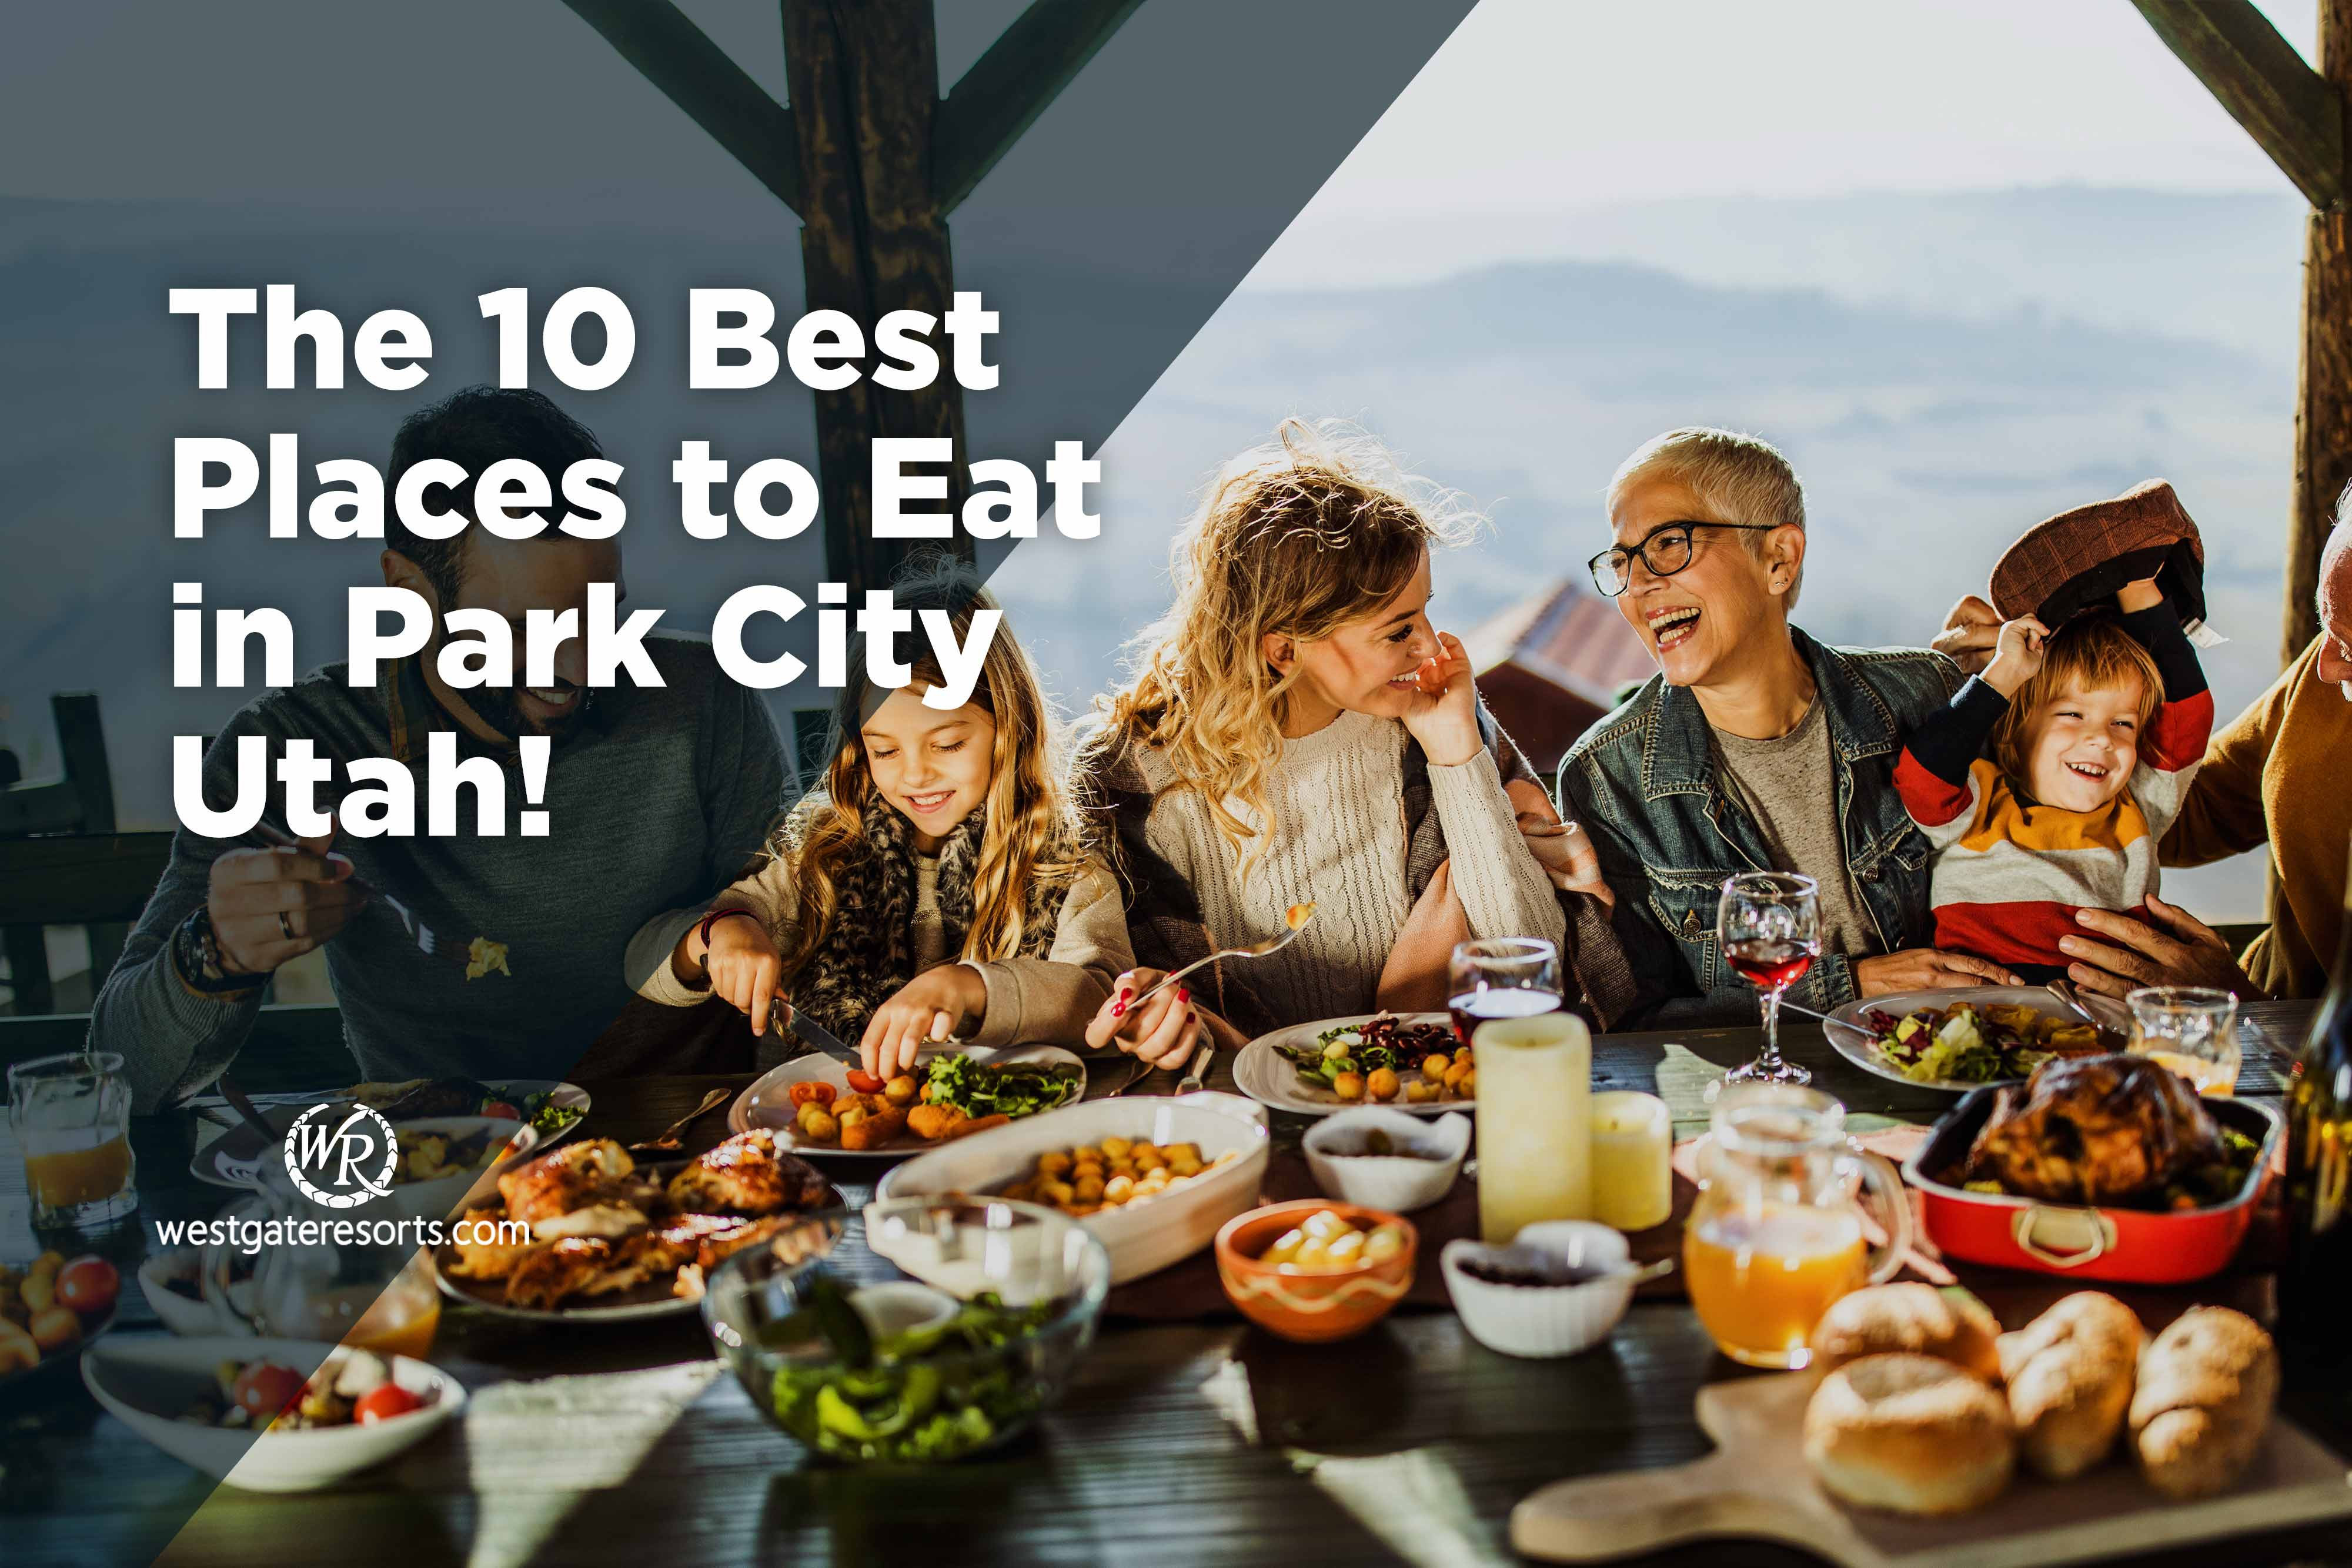 The 10 Best Places To Eat In Park City Utah | The Best Restaurants In Park City